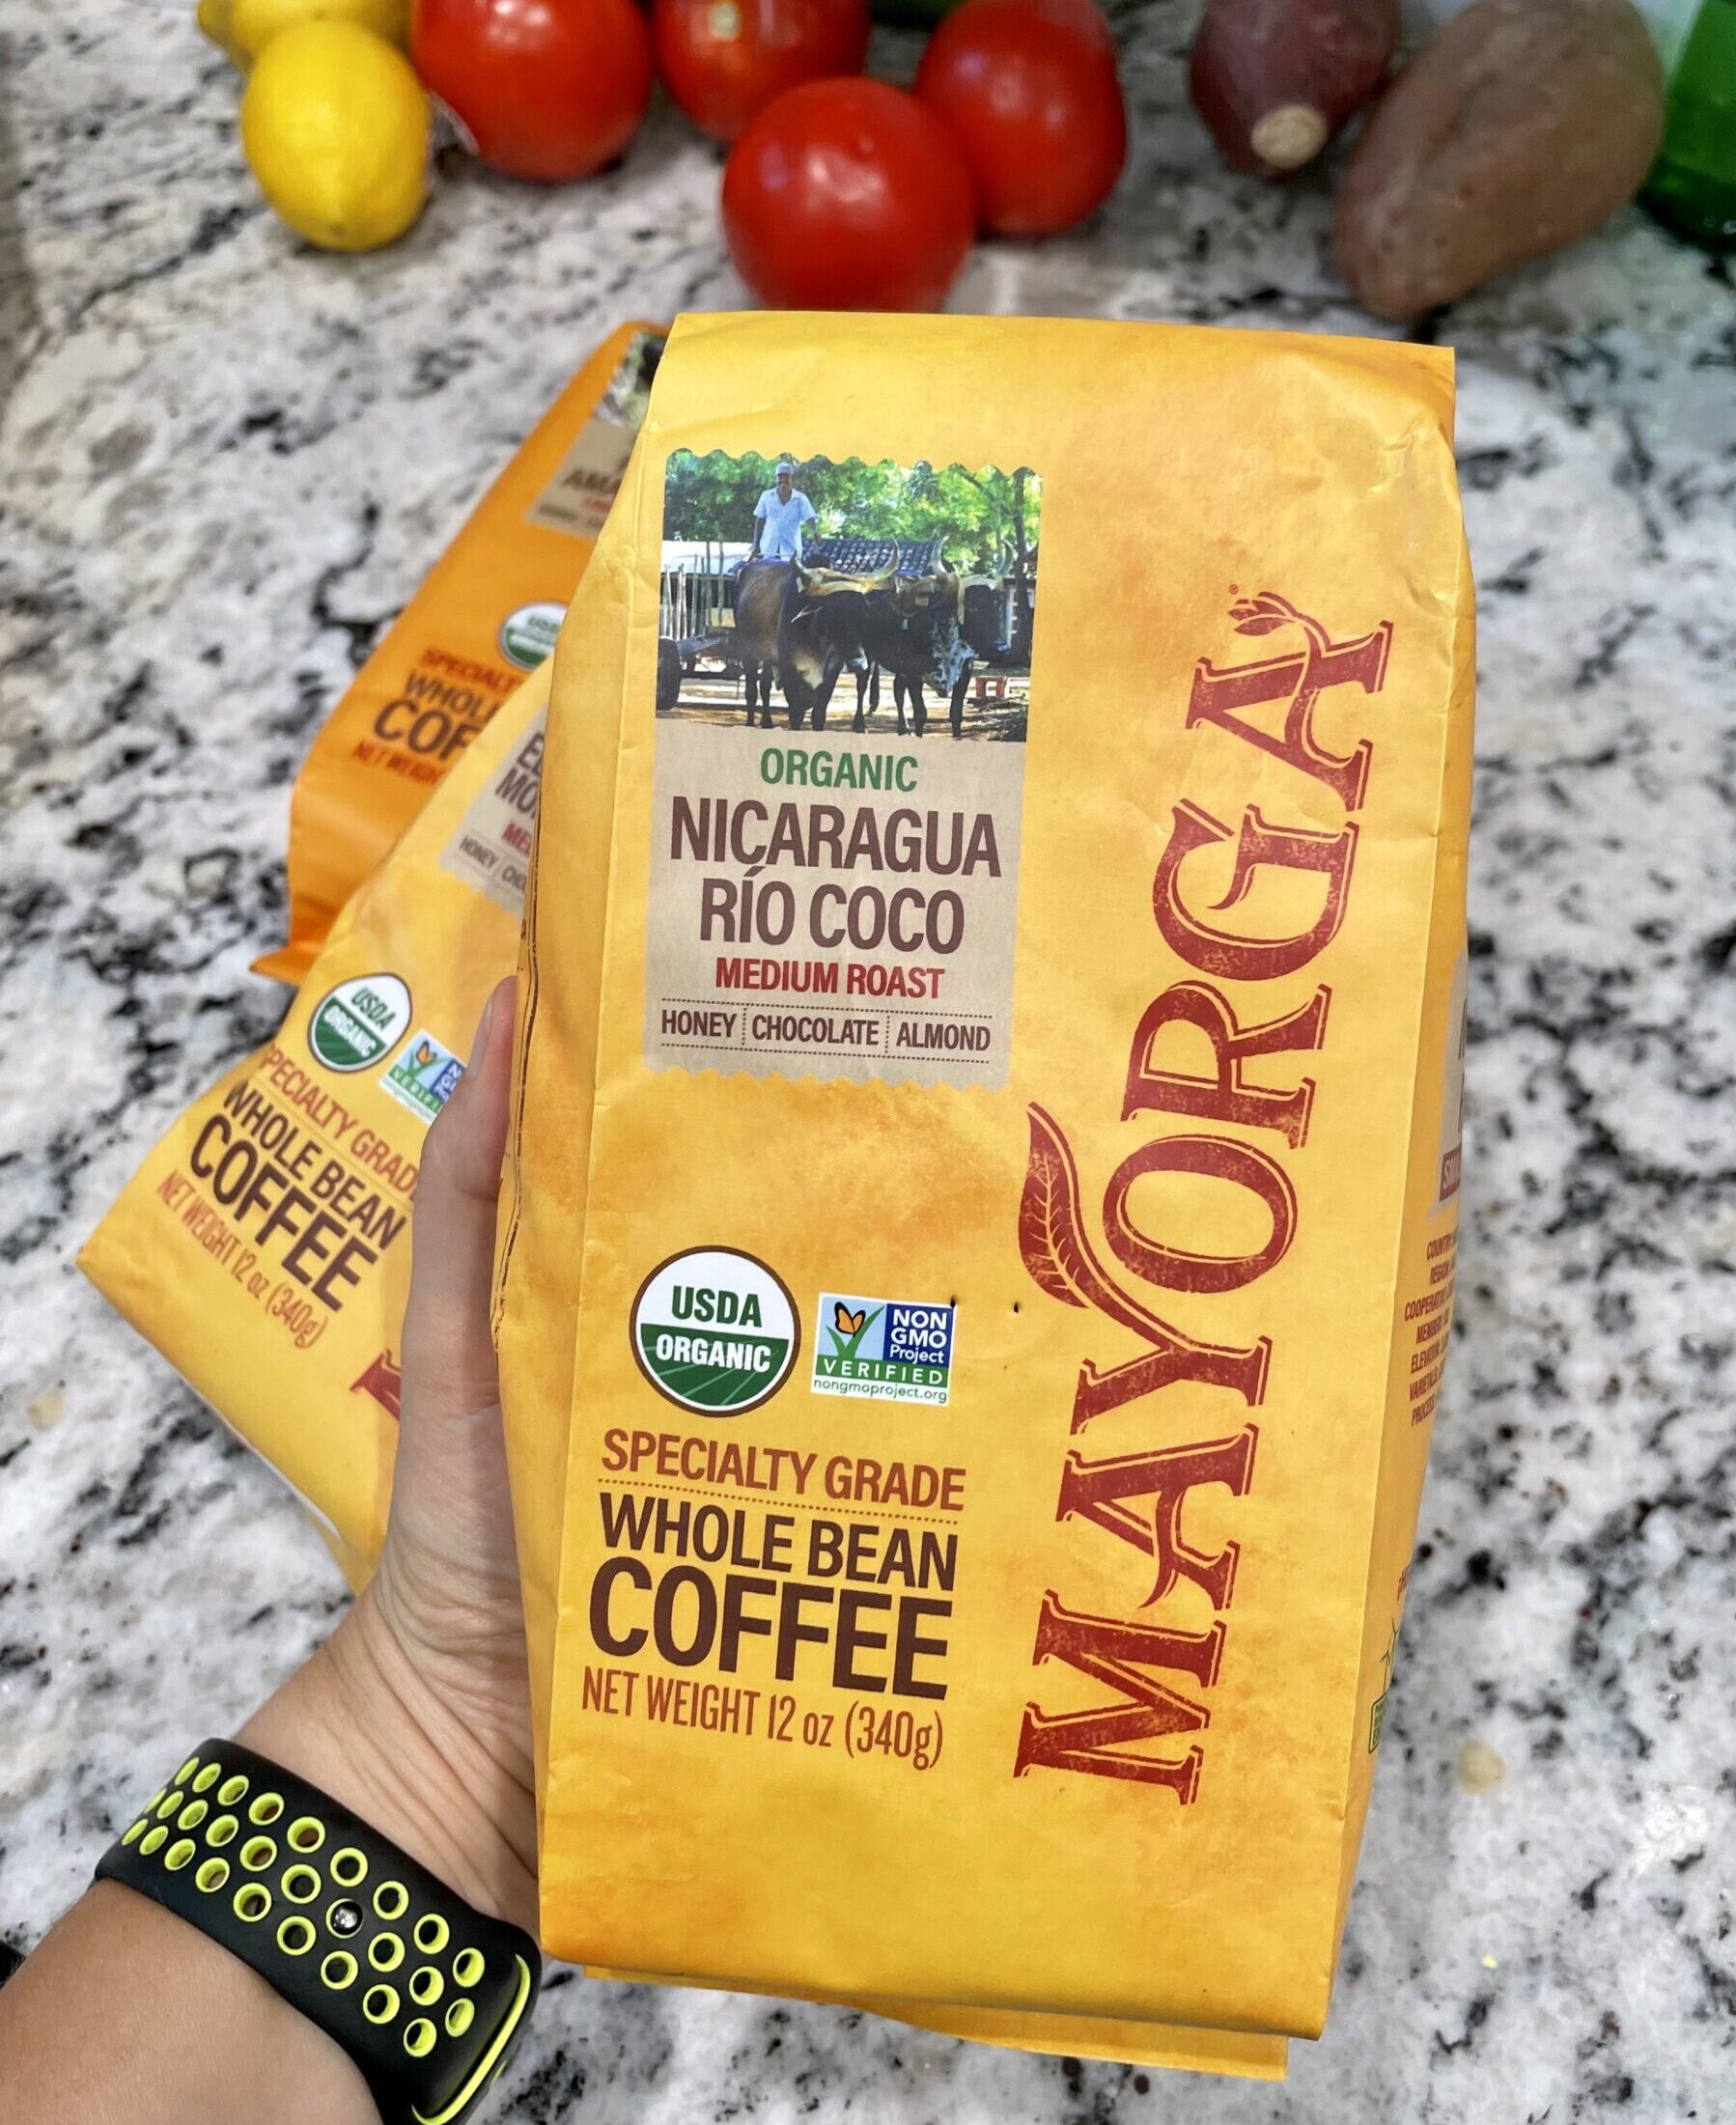 Mayorga Coffee Bag in a Hand with vegetables in the background